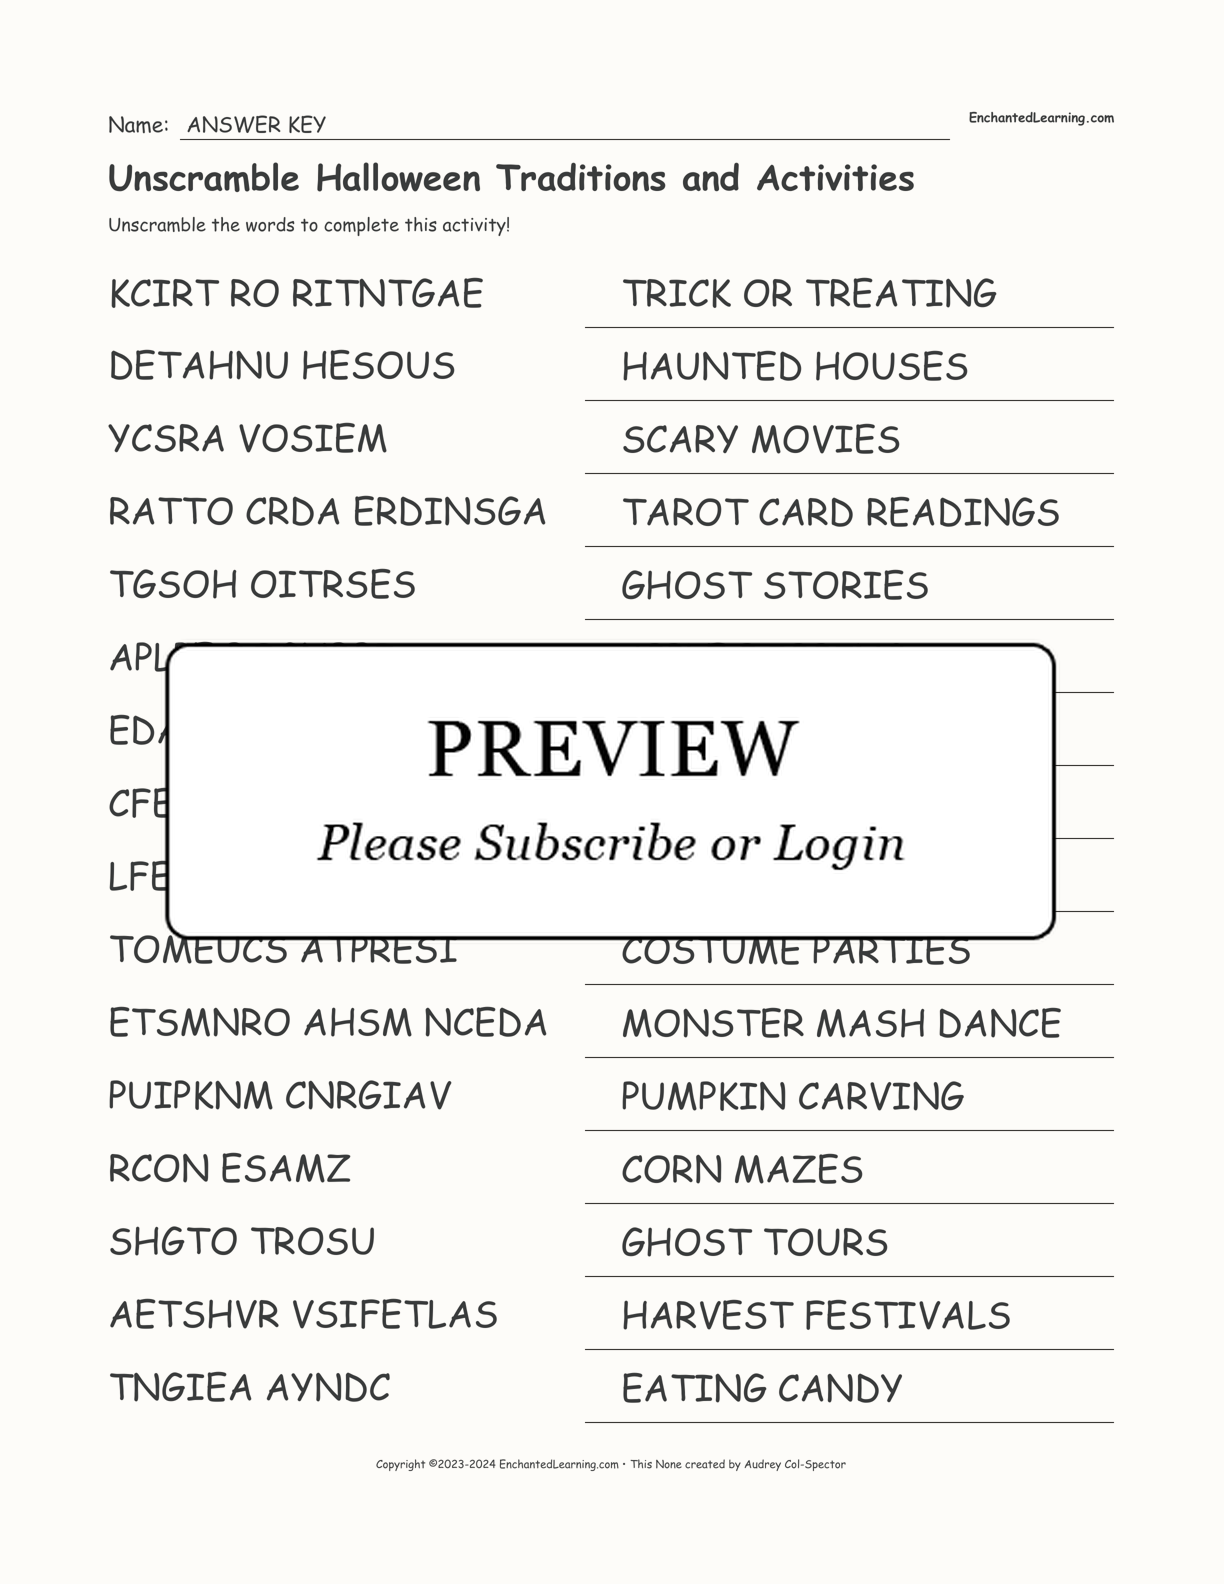 Unscramble Halloween Traditions and Activities interactive worksheet page 2